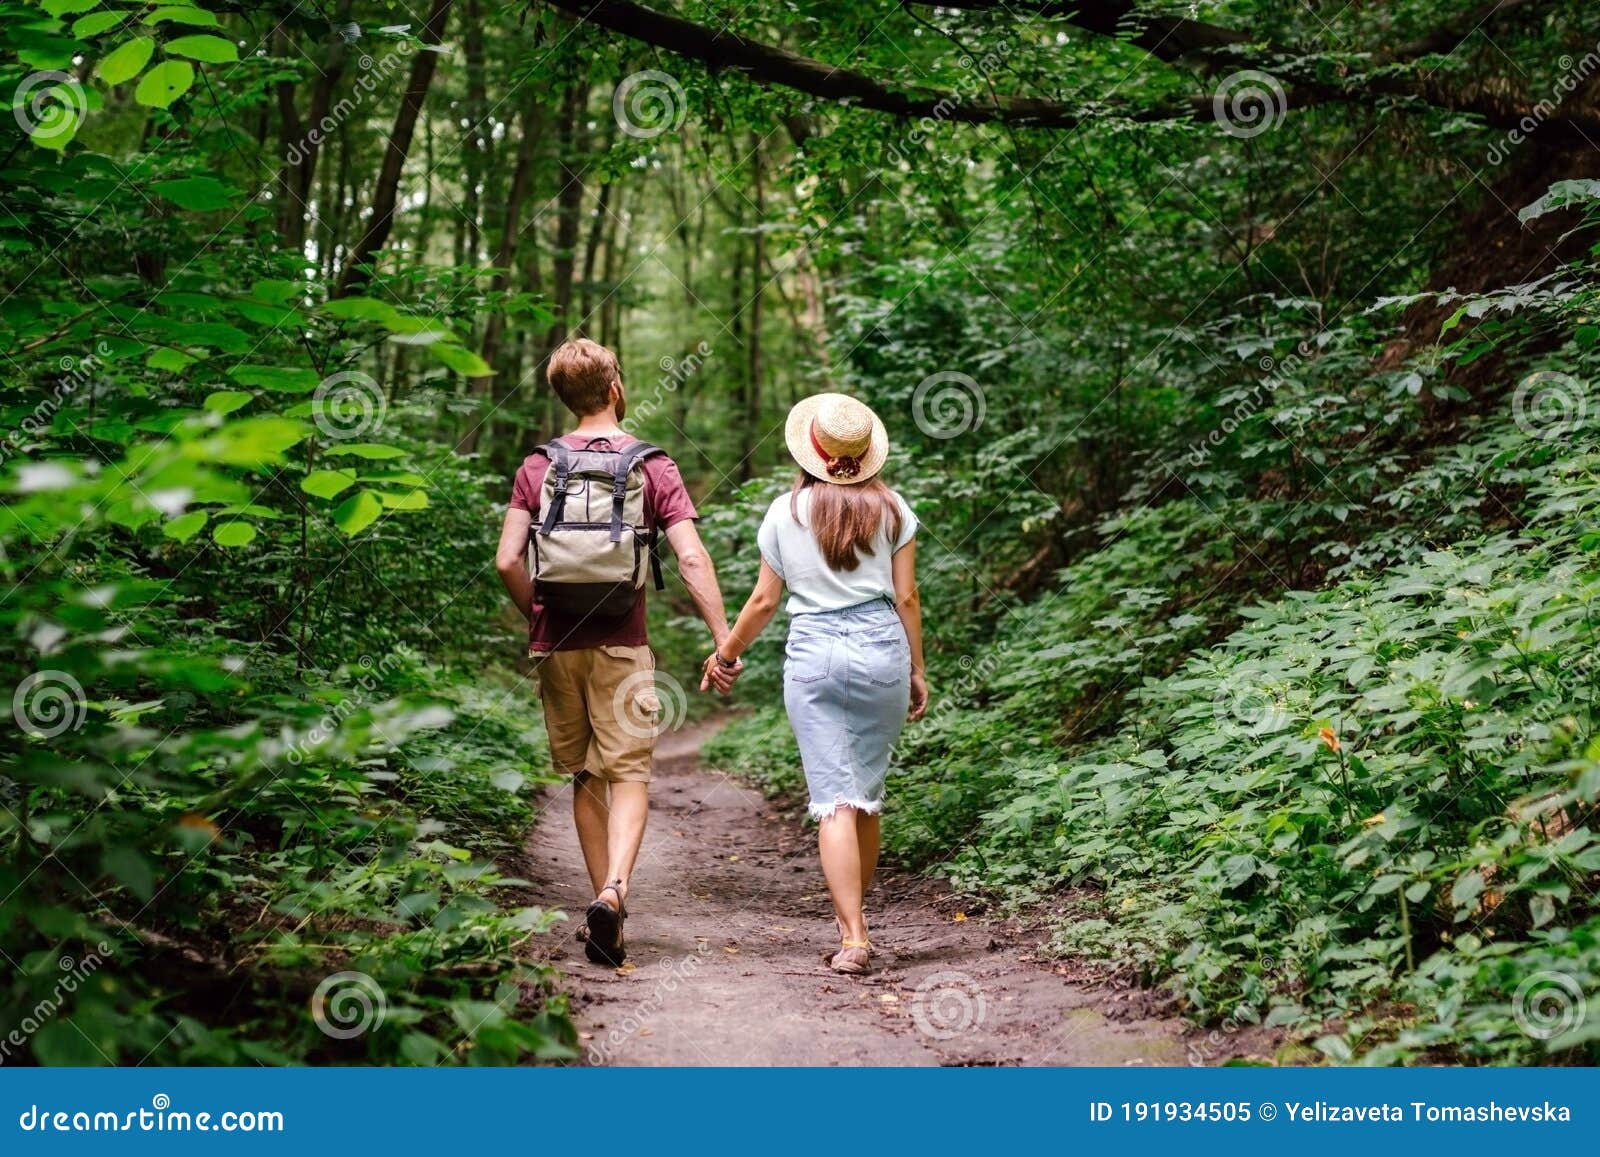 Couple Holding Hands Walking In Forest Back View